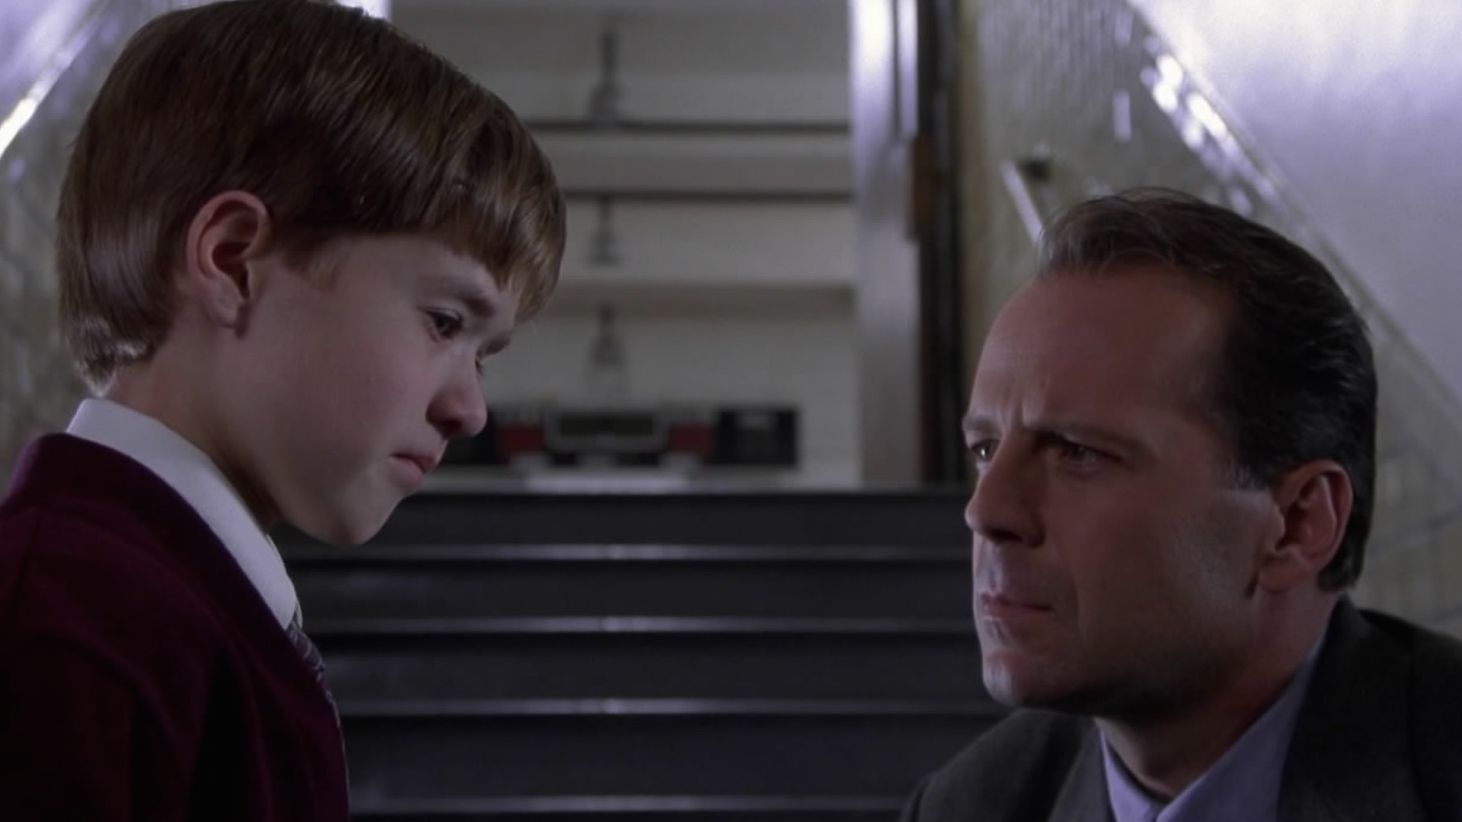 15 Twisted Facts About The Sixth Sense | Mental Floss